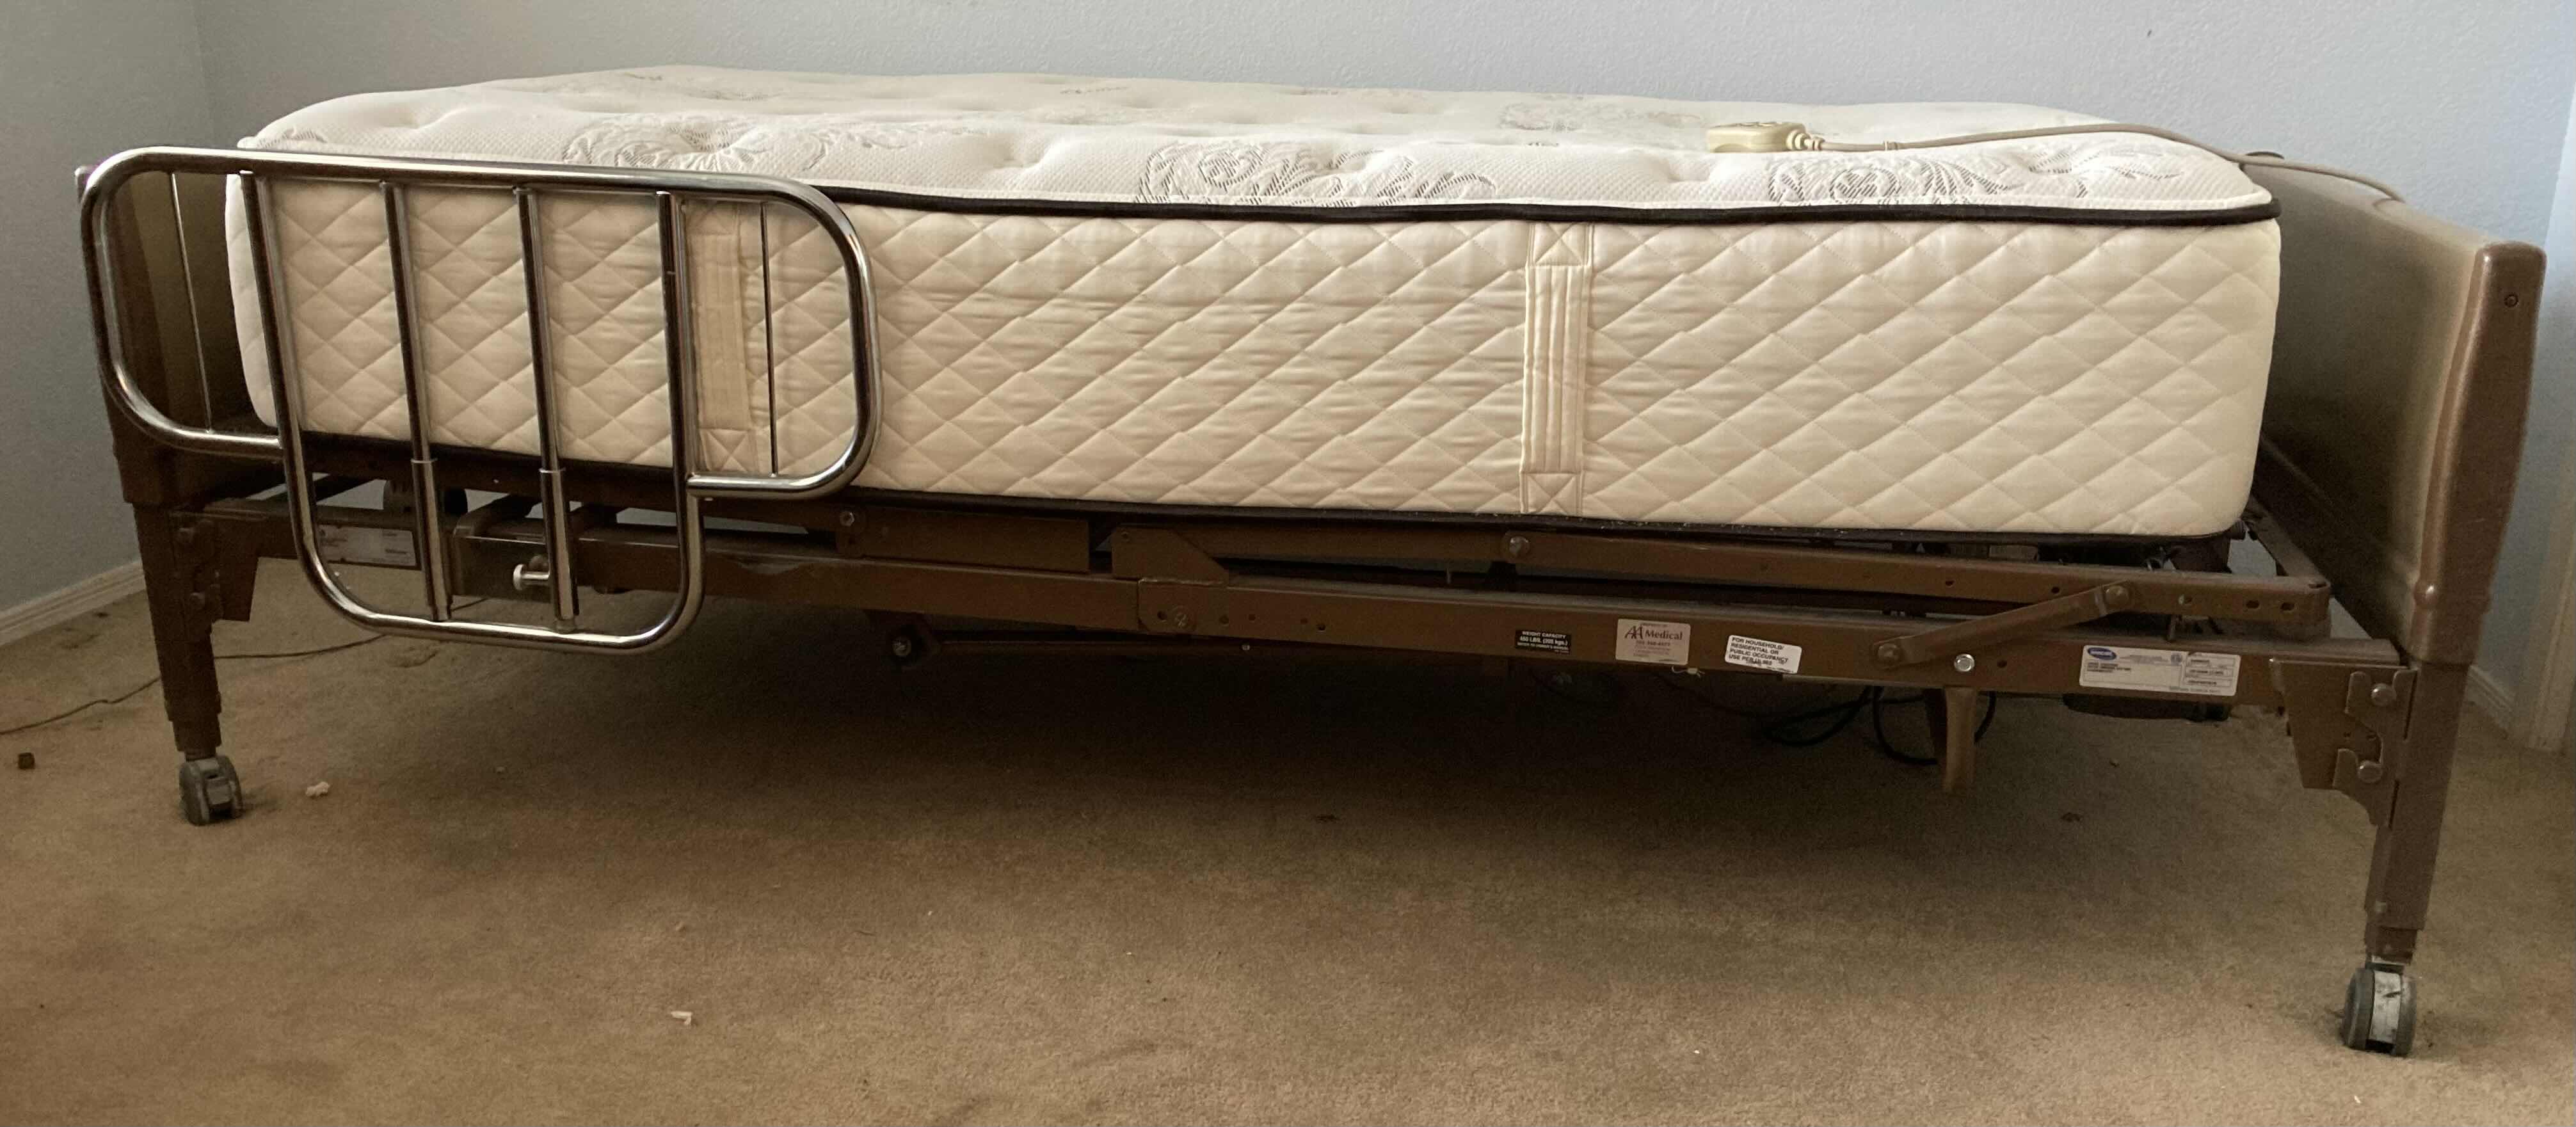 Photo 2 of INVACARE STEEL TWIN MEDICAL BED MODEL 5490IVC W HALSTEAD TWIN MATTRESS